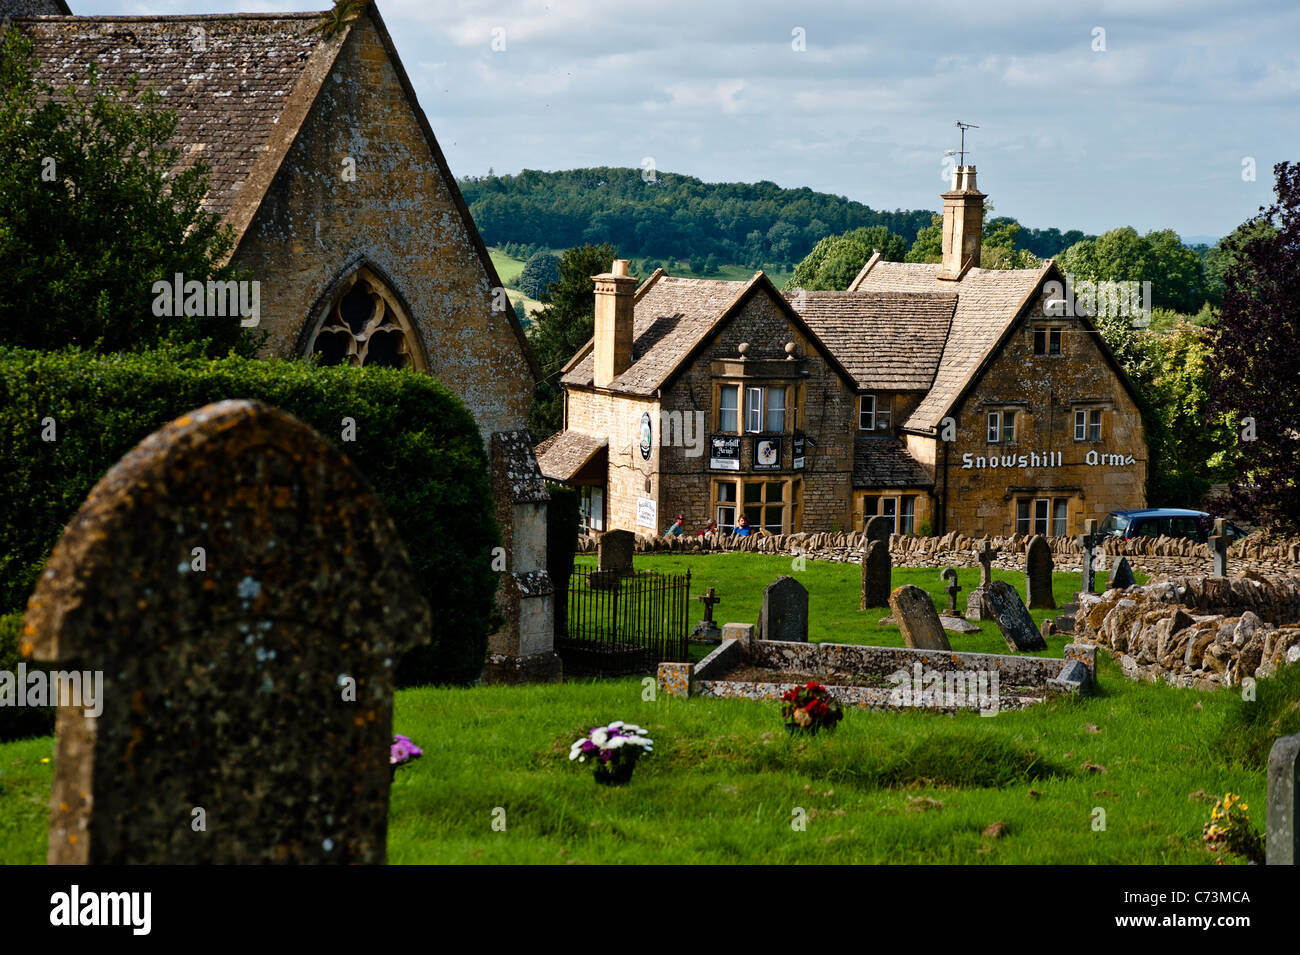 Snowhill Arms pub in the Cotswolds Stock Photo